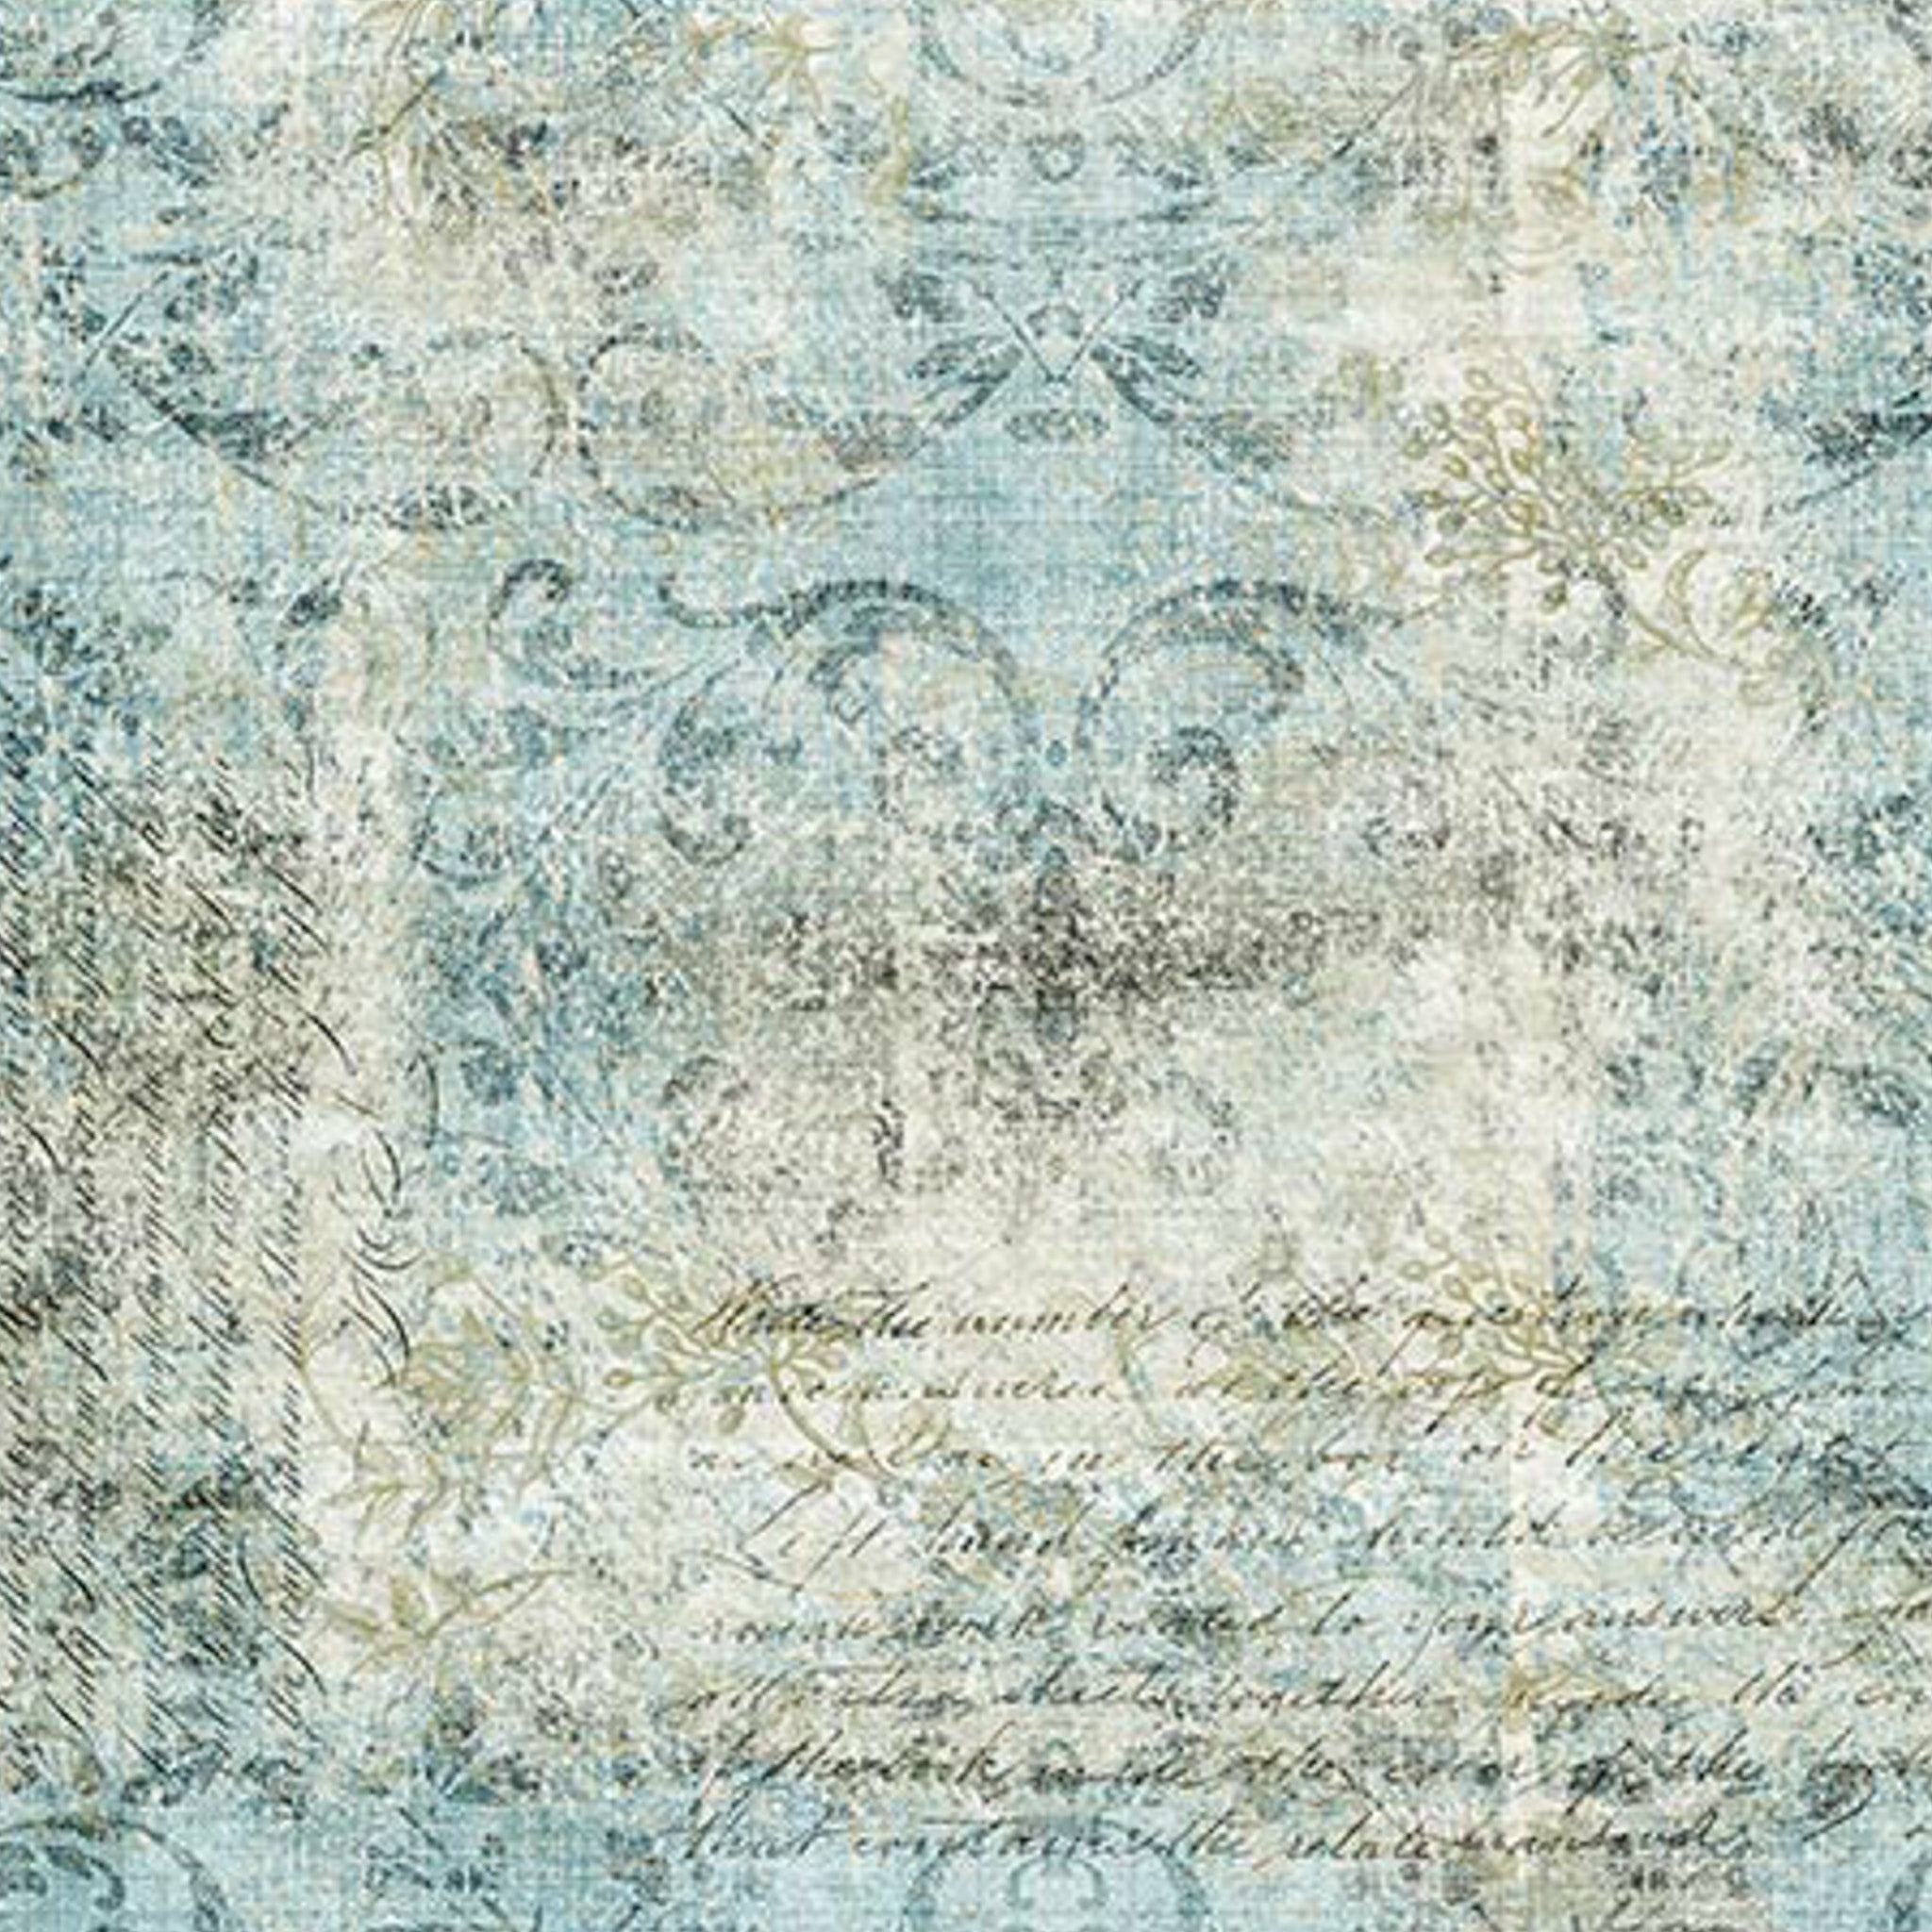 A0 rice decoupage paper of a faded light blue and cream colored fabric that has a worn damask scroll design and script writing.